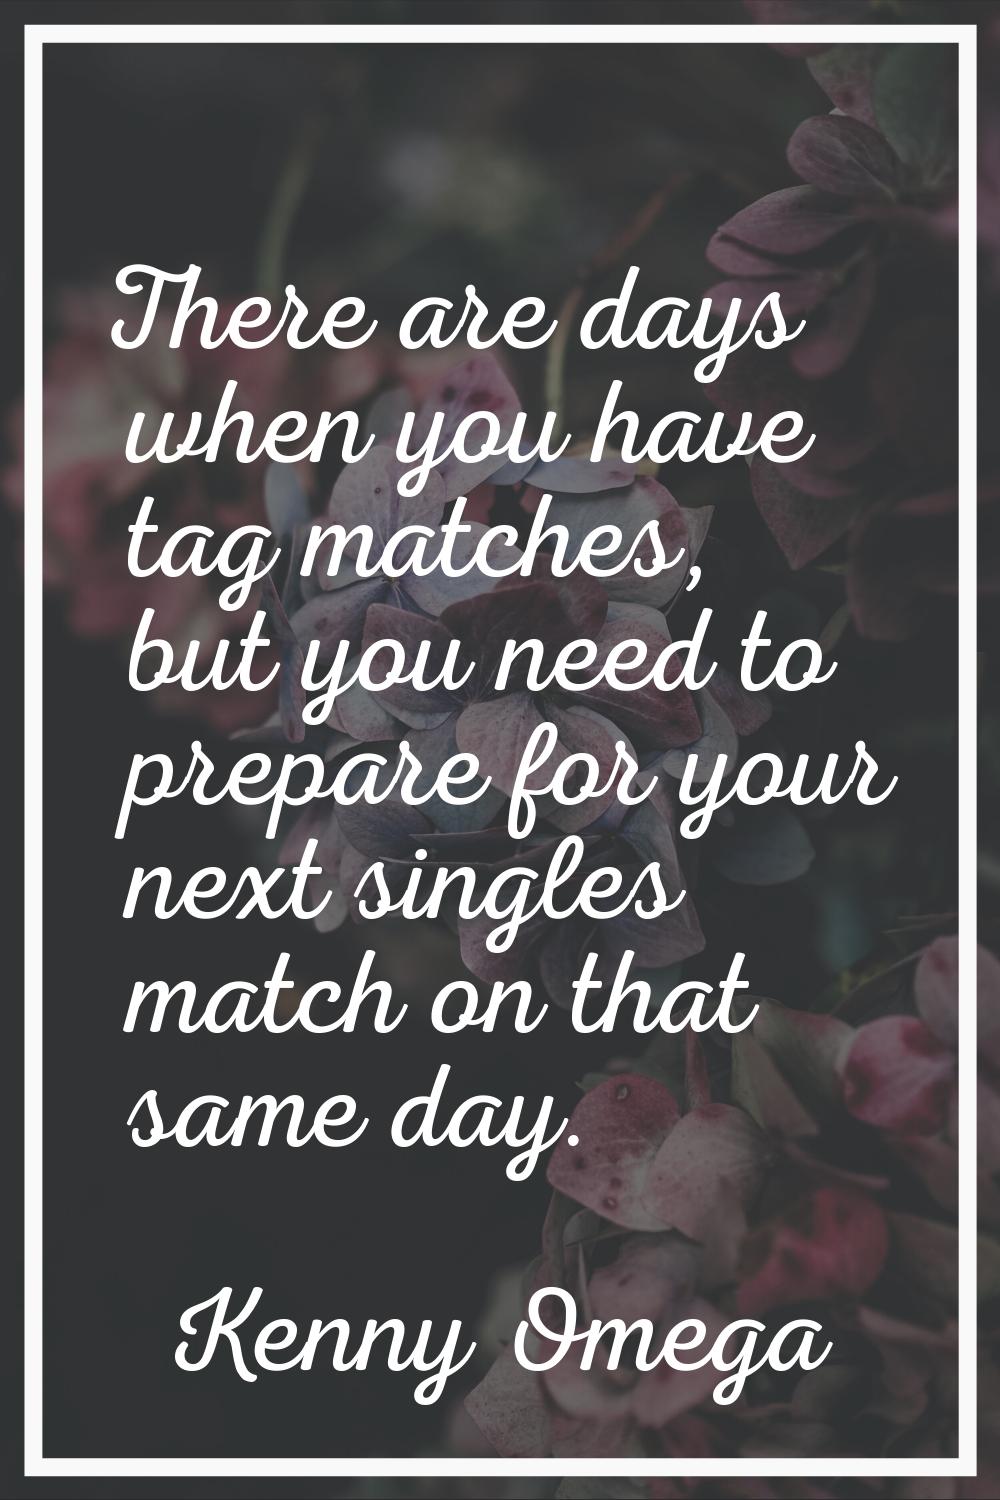 There are days when you have tag matches, but you need to prepare for your next singles match on th